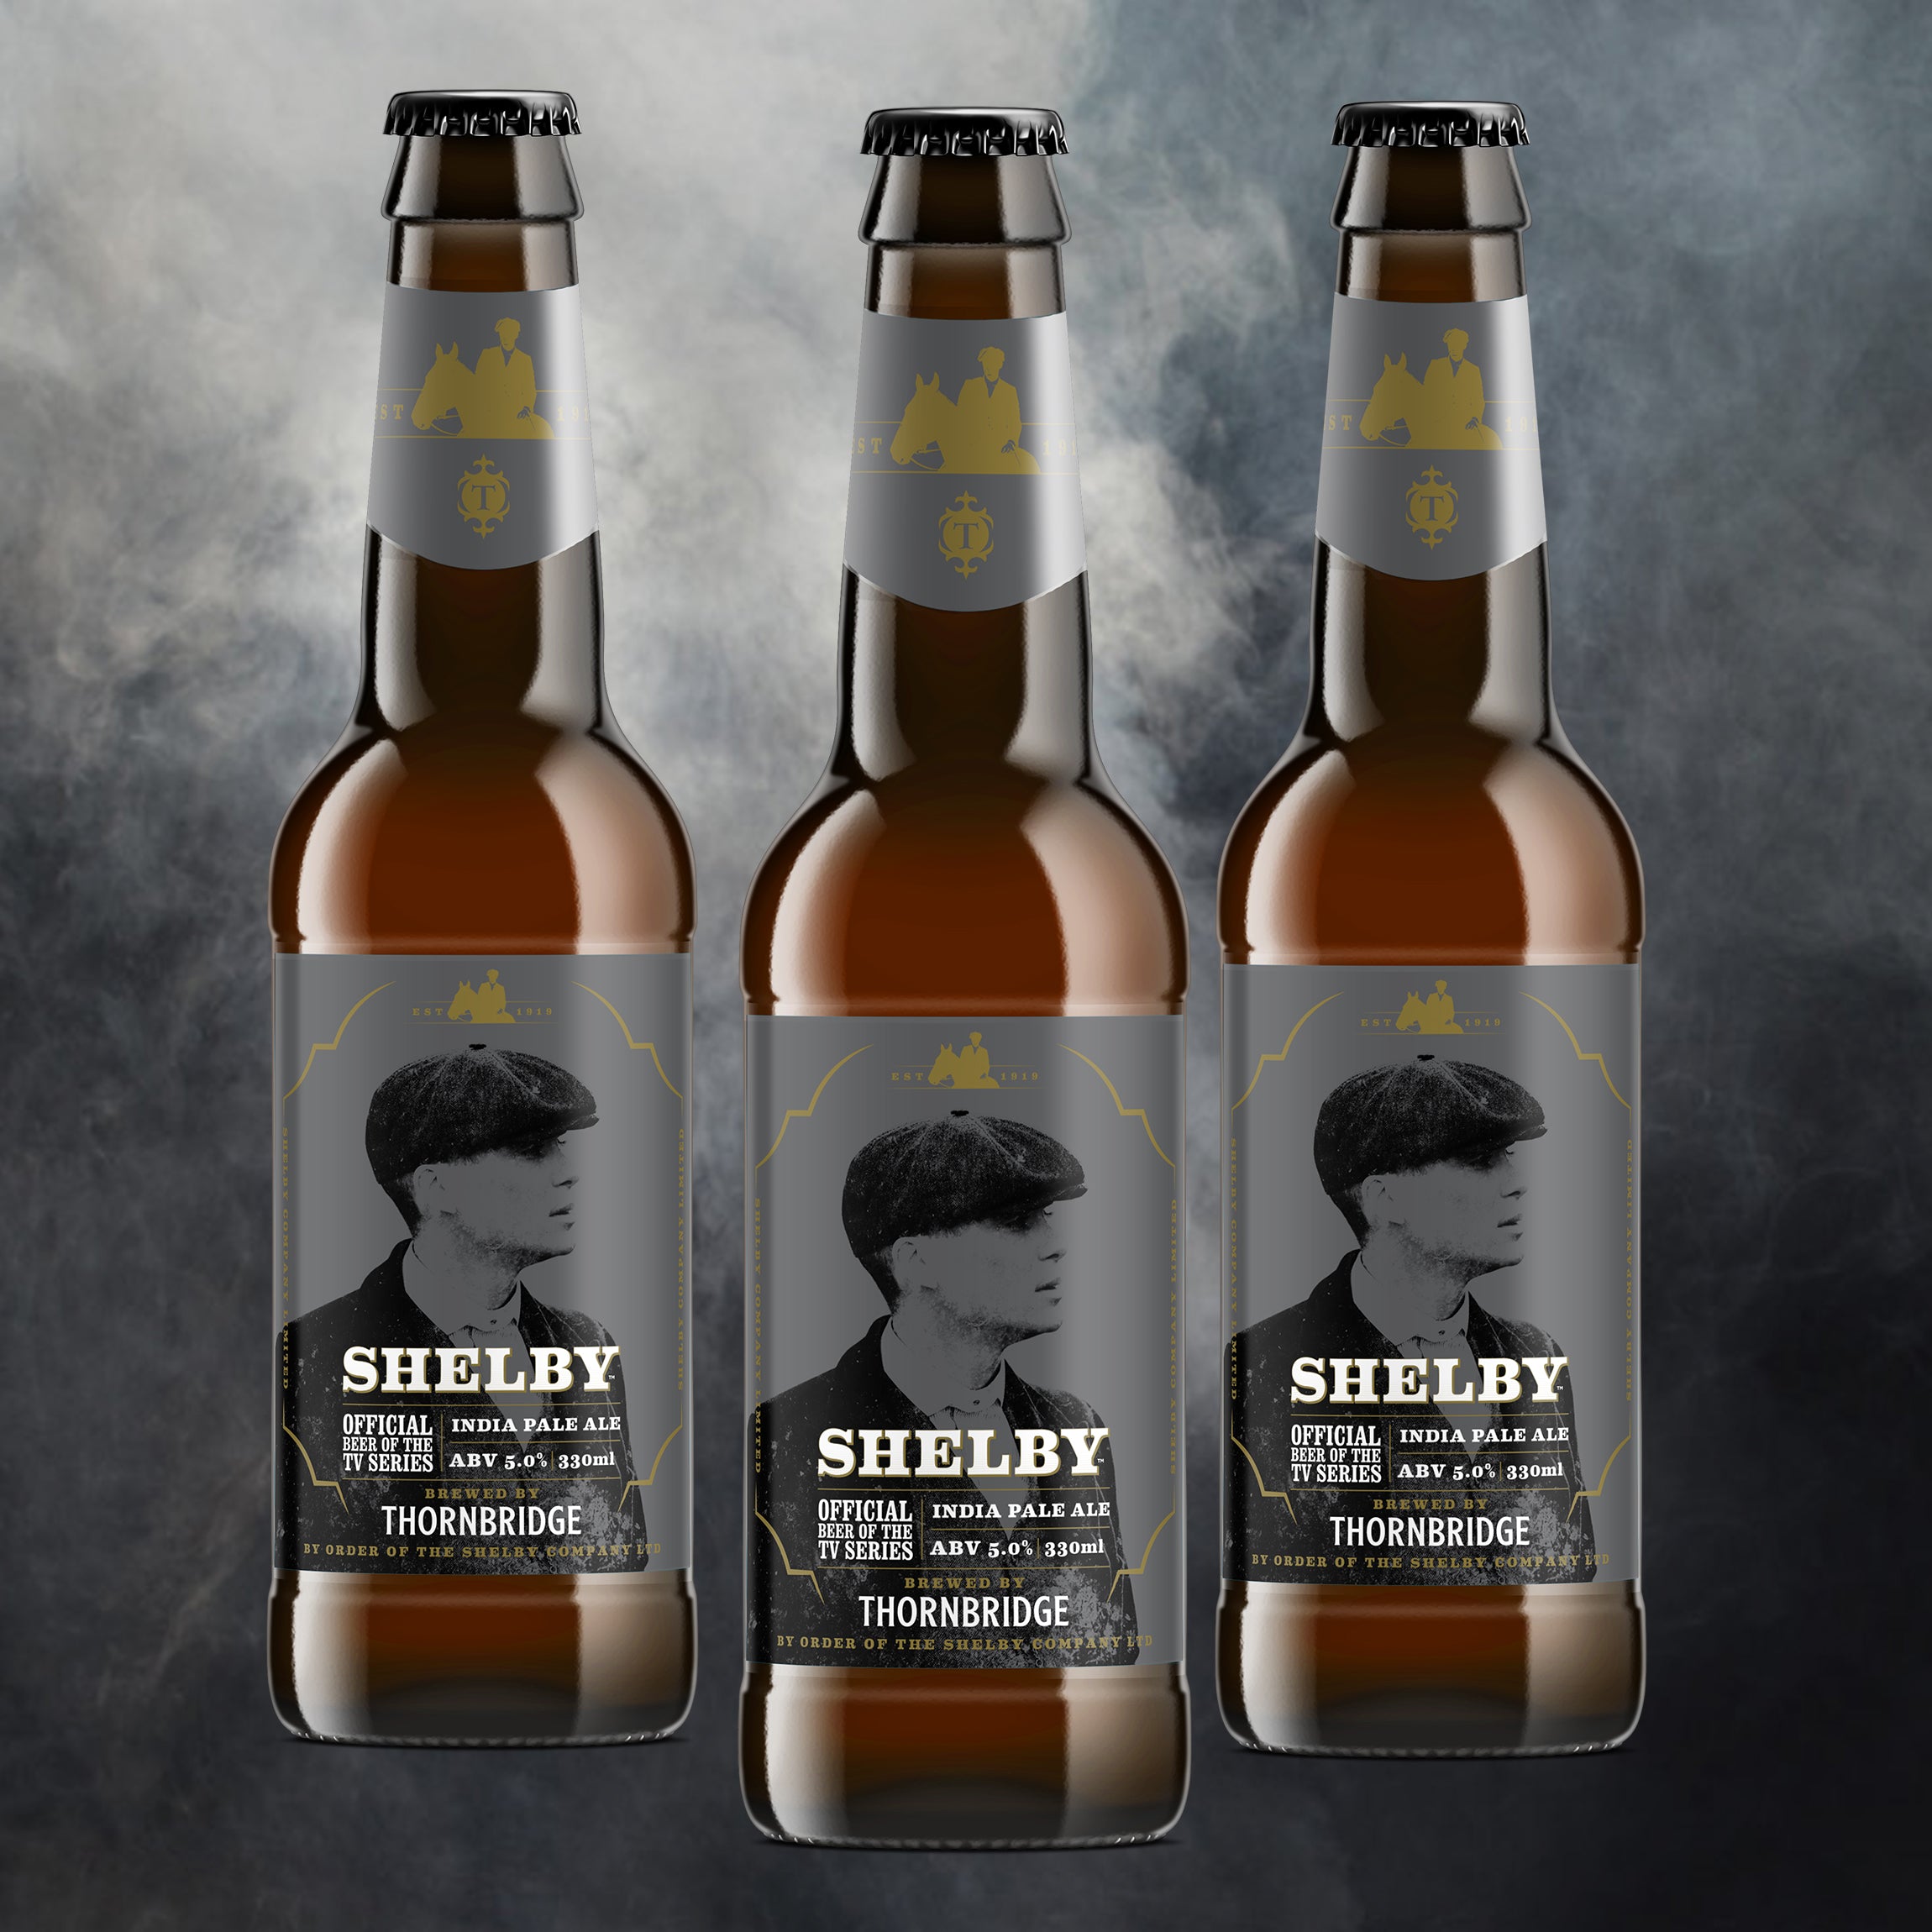 Shelby - The Official Beer of the TV Series - 5% IPA - 12 x 330ml bottles